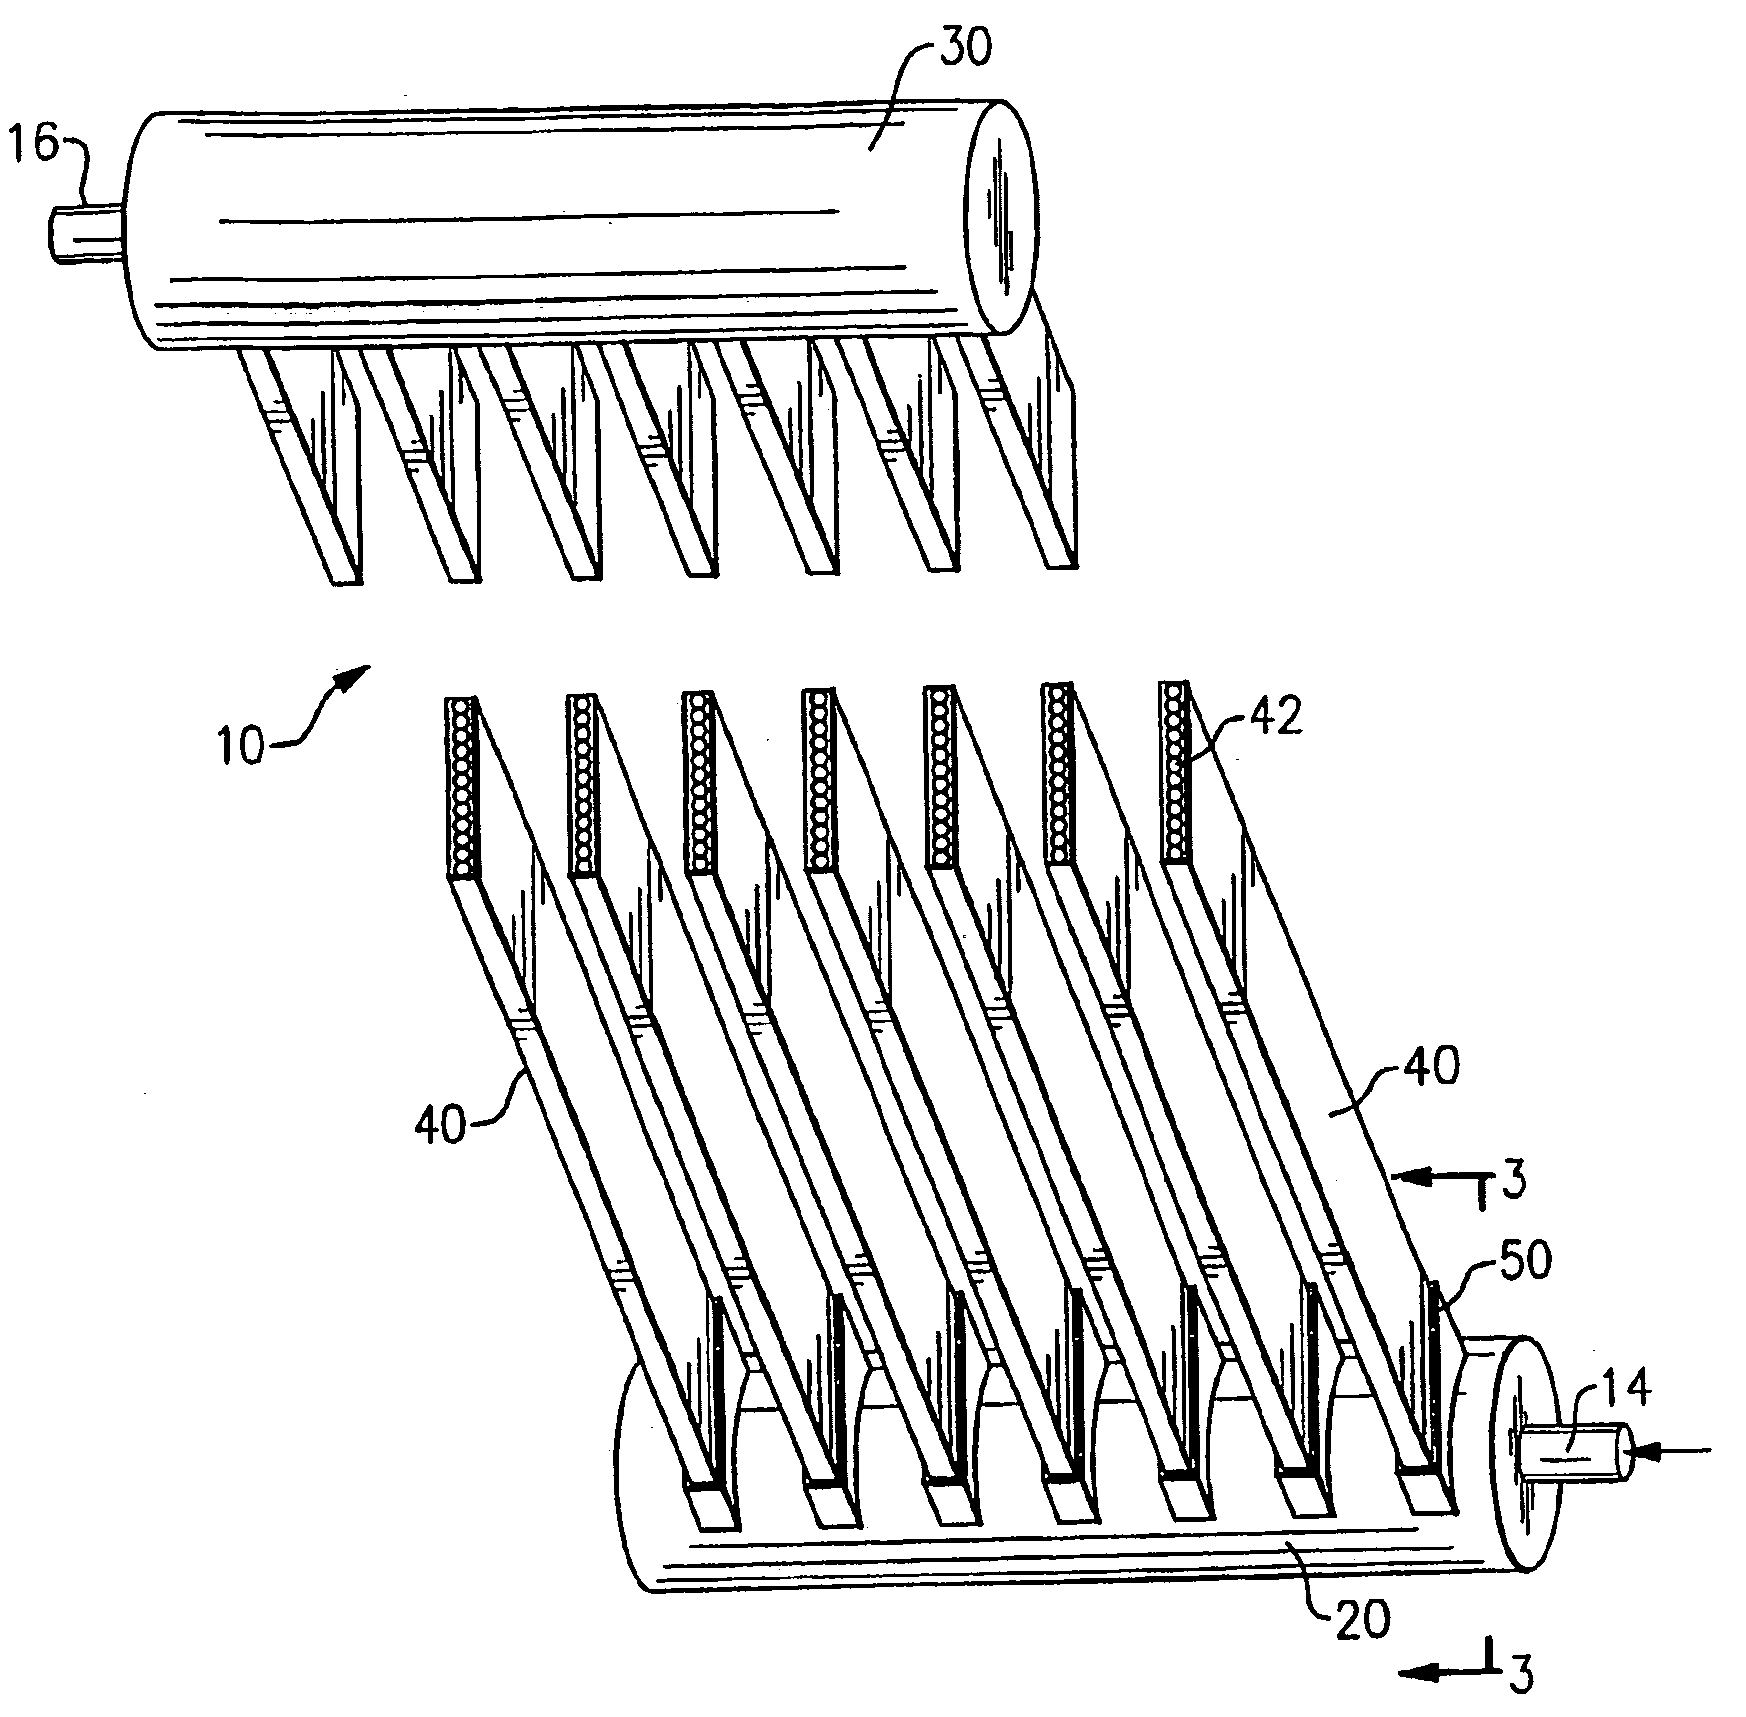 Mini-Channel Heat Exchanger With Multi-Stage Expansion Device